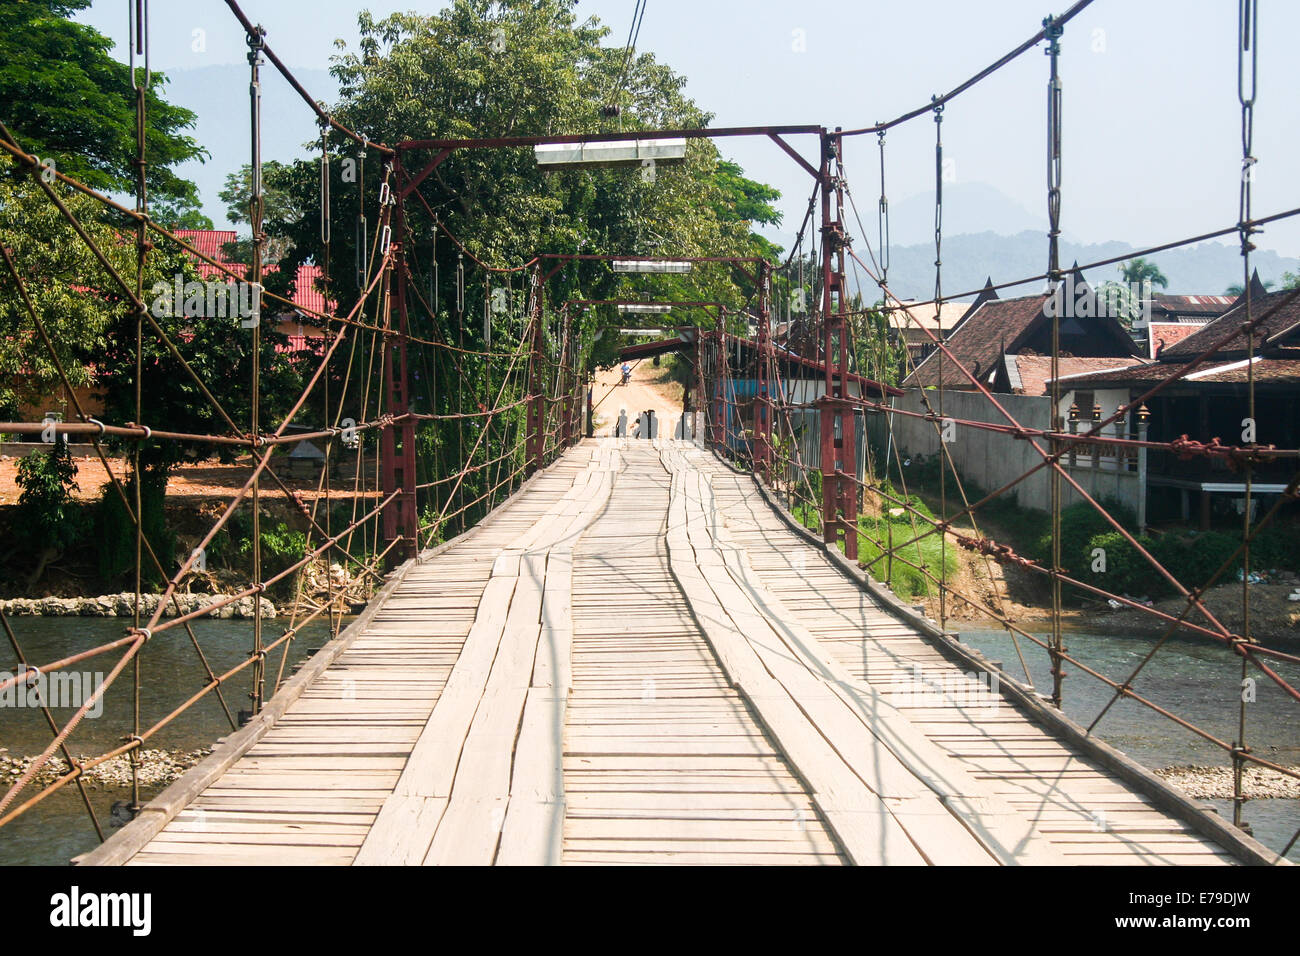 The bridge that connects Vang Vieng to the rural region. Stock Photo